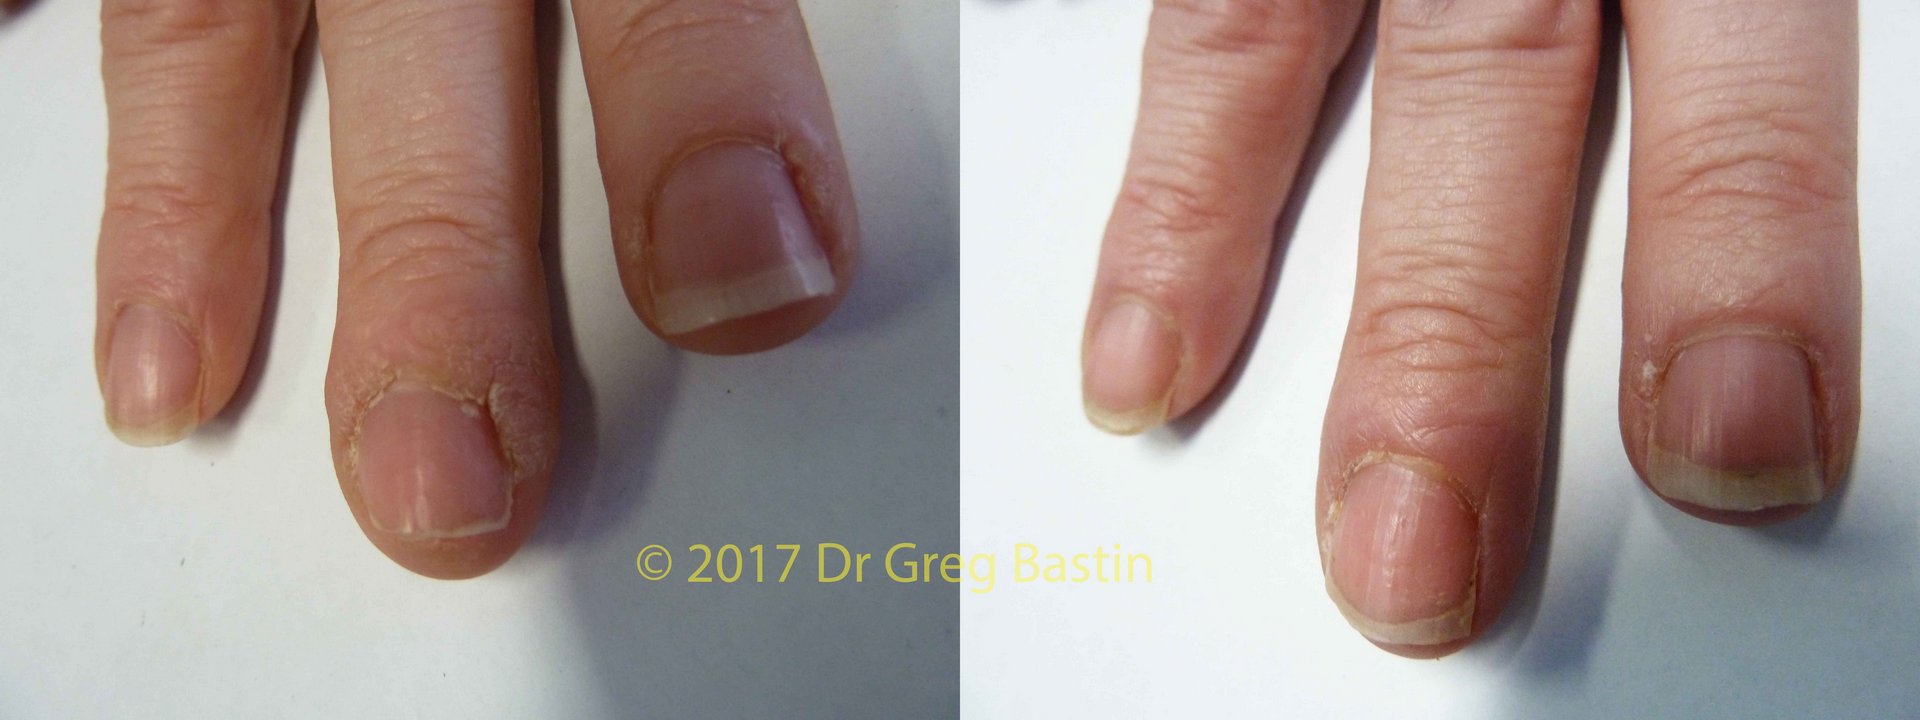 stubborn wart removal on hands